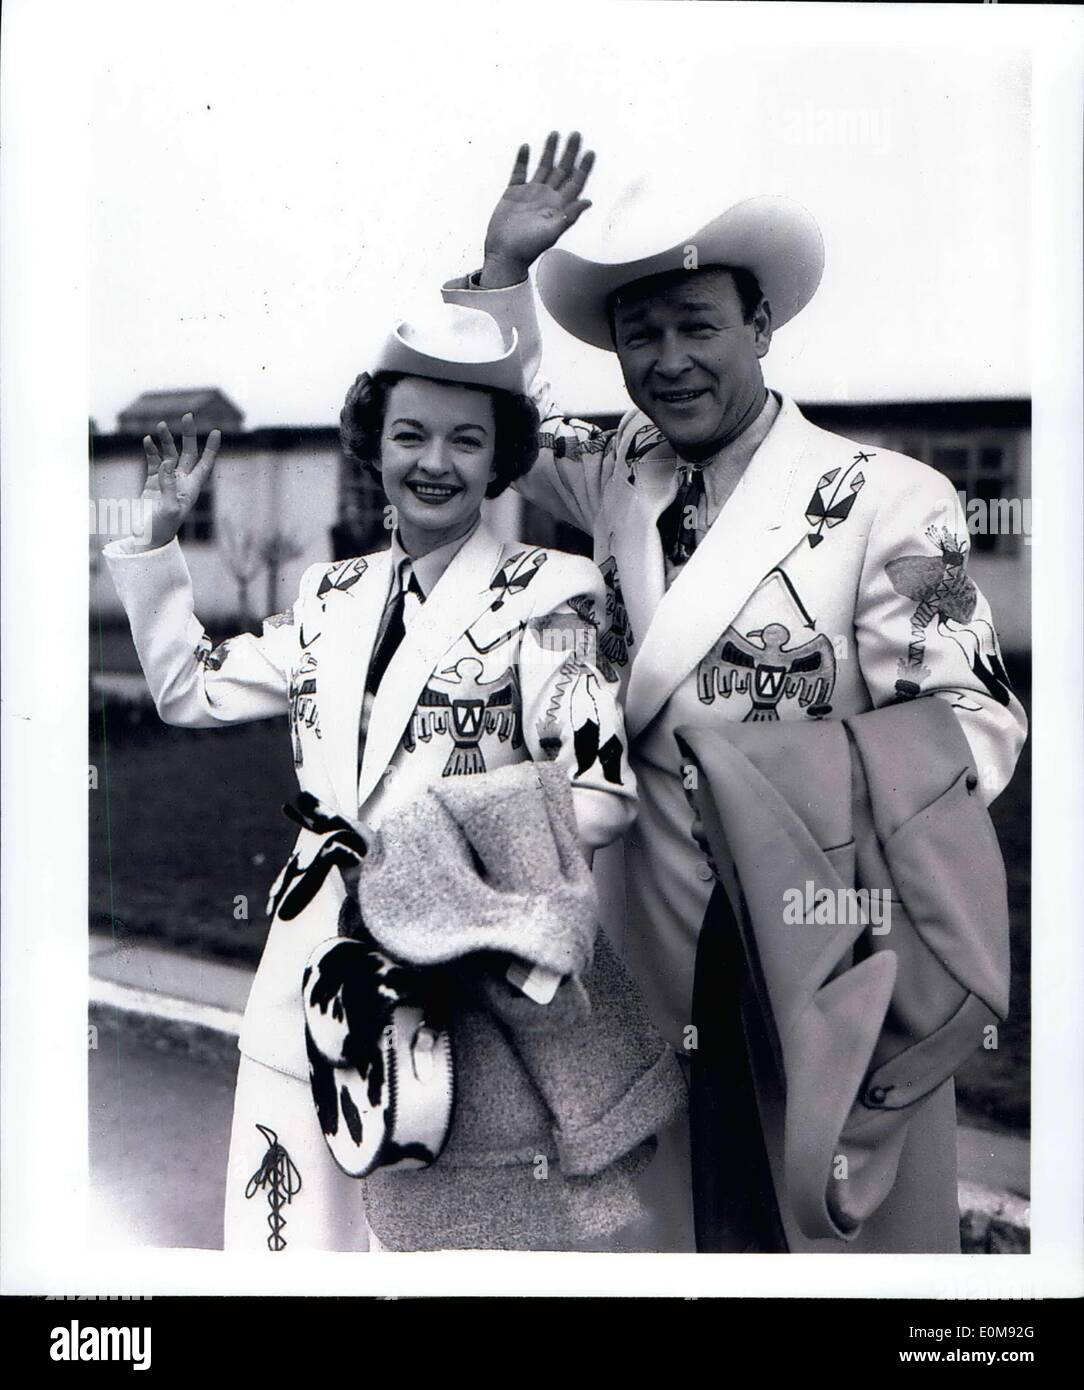 Feb. 10, 1954 - The King of the cowboys'' - and ''Queen of the West'' arrive in London.. Roy Rogers known as the ''King of the Cowboys'' - and his wife Dale Evans - who has been called ''Queen of the West'' arrived at London Airport this morning - for a Variety tour which starts in Glasgow on Feb, 15th. Photo shows Roy Rogers and his wife Dale Evans - on their arrival - complete in their 'wild west' clothes - at London Airport this morning. Stock Photo